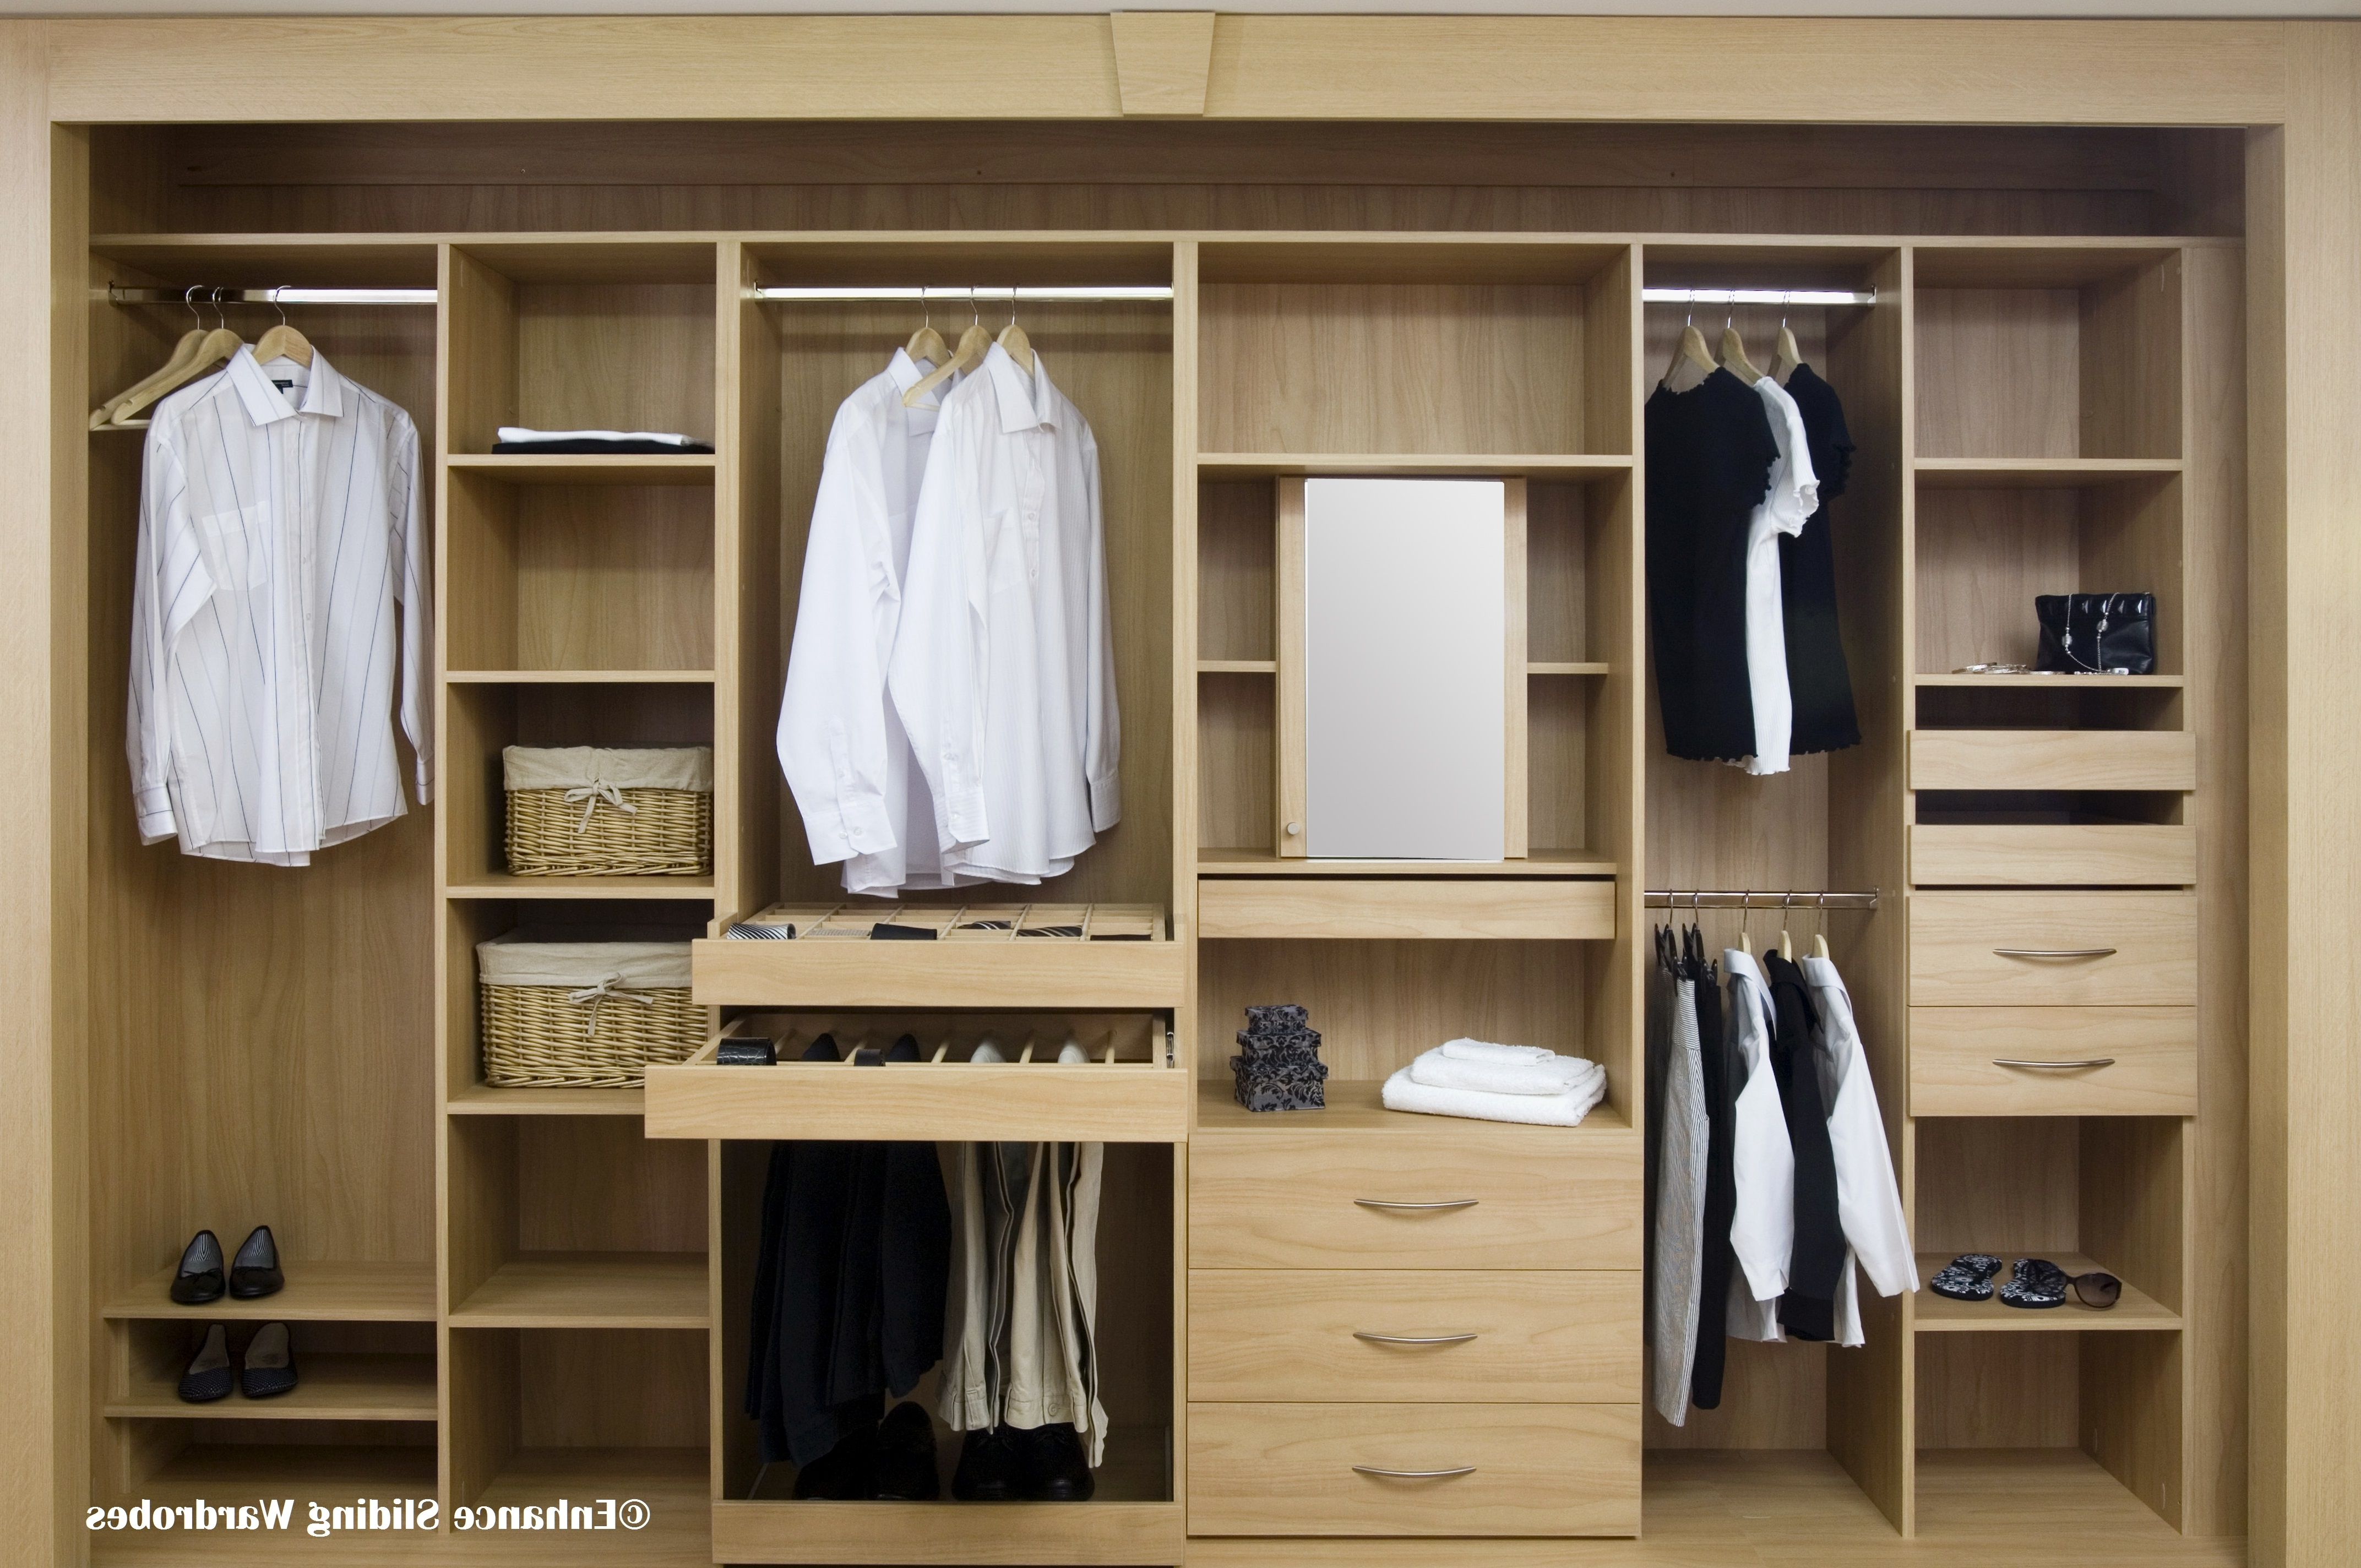 Best And Newest Oak Interiors – Hanging, Shelves, Drawers #walkin #closet #storage Inside Oak Wardrobes With Drawers And Shelves (View 10 of 15)